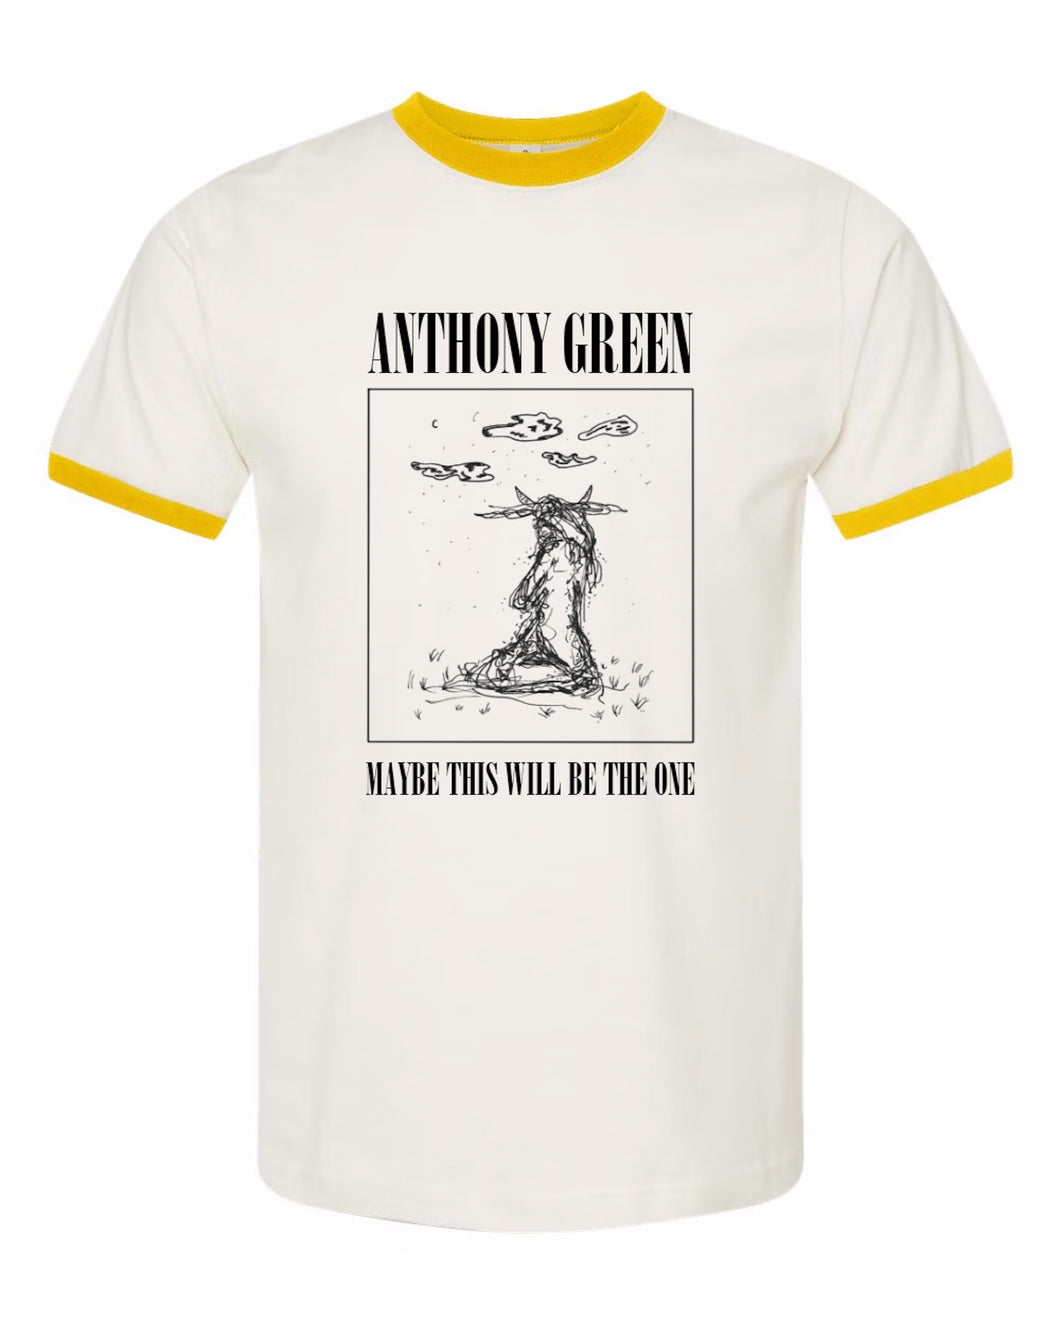 Anthony Green - Maybe This Will Be The One T Shirt